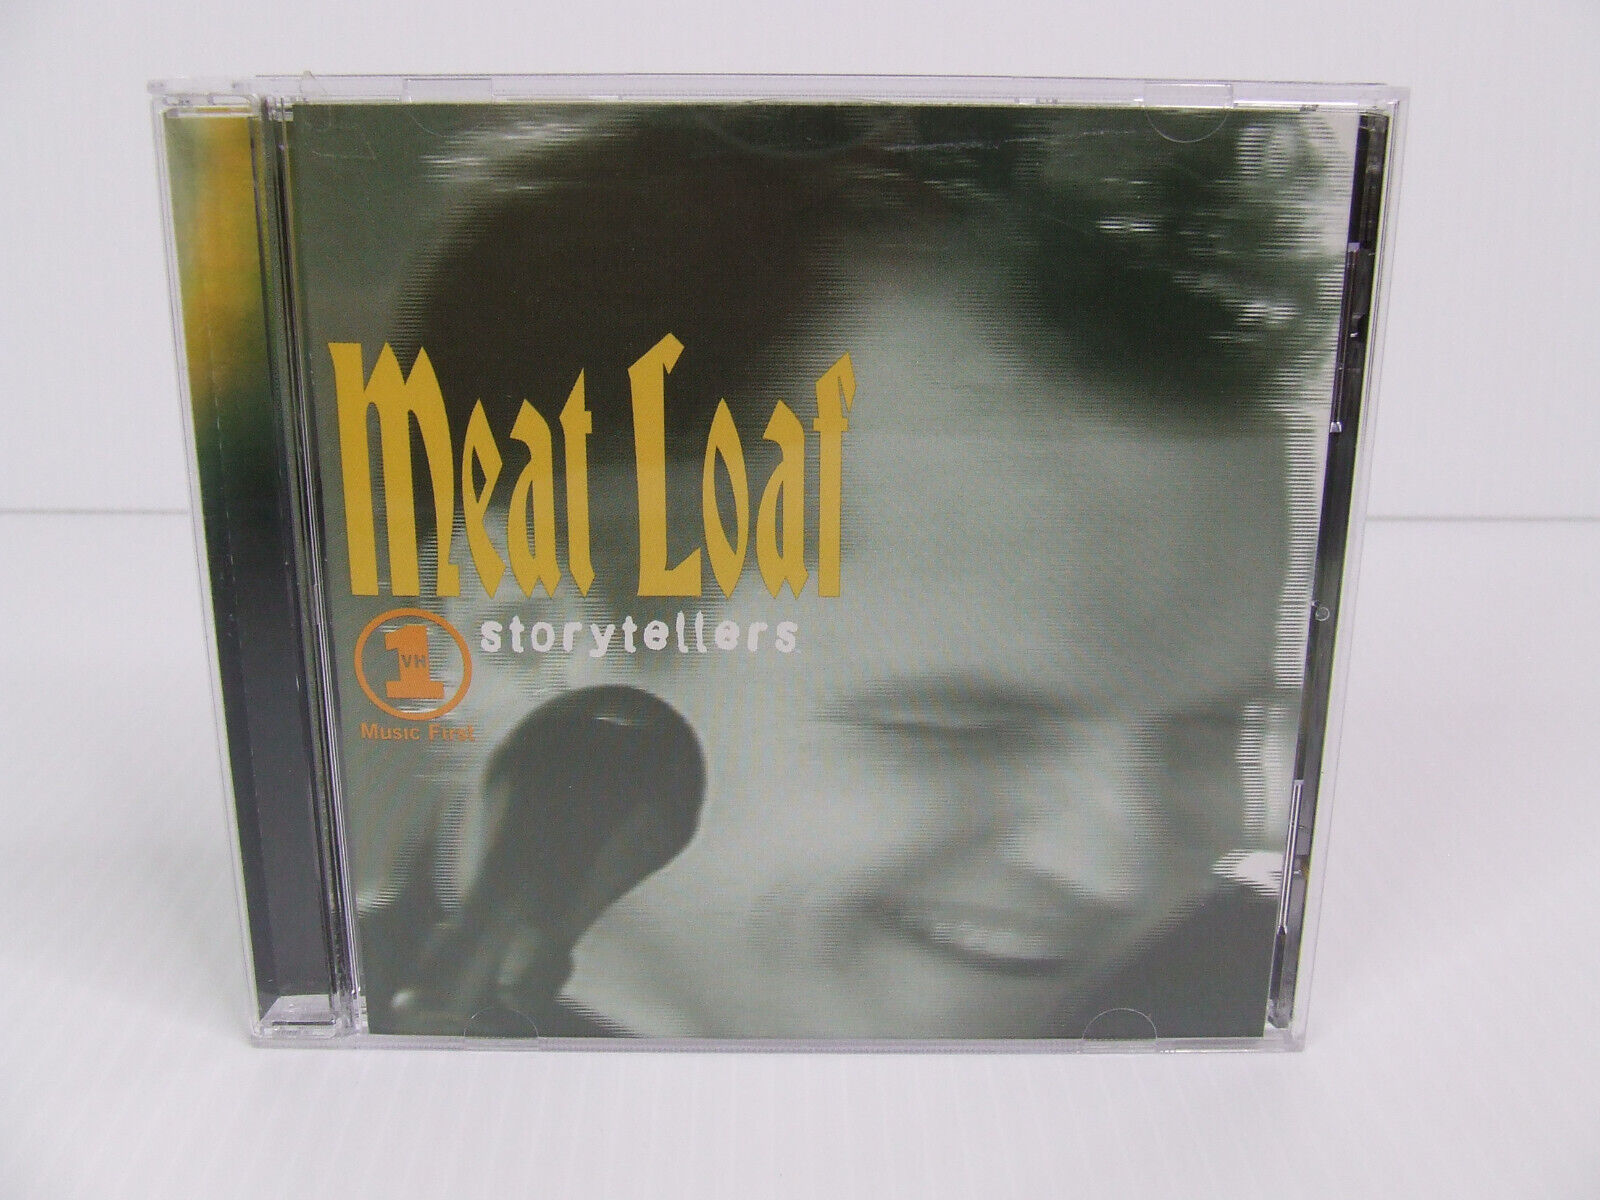 Meat Loaf - VH1 Sorytellers (CD, 1999 Beyond Music BMG) Bat Out Of Hell